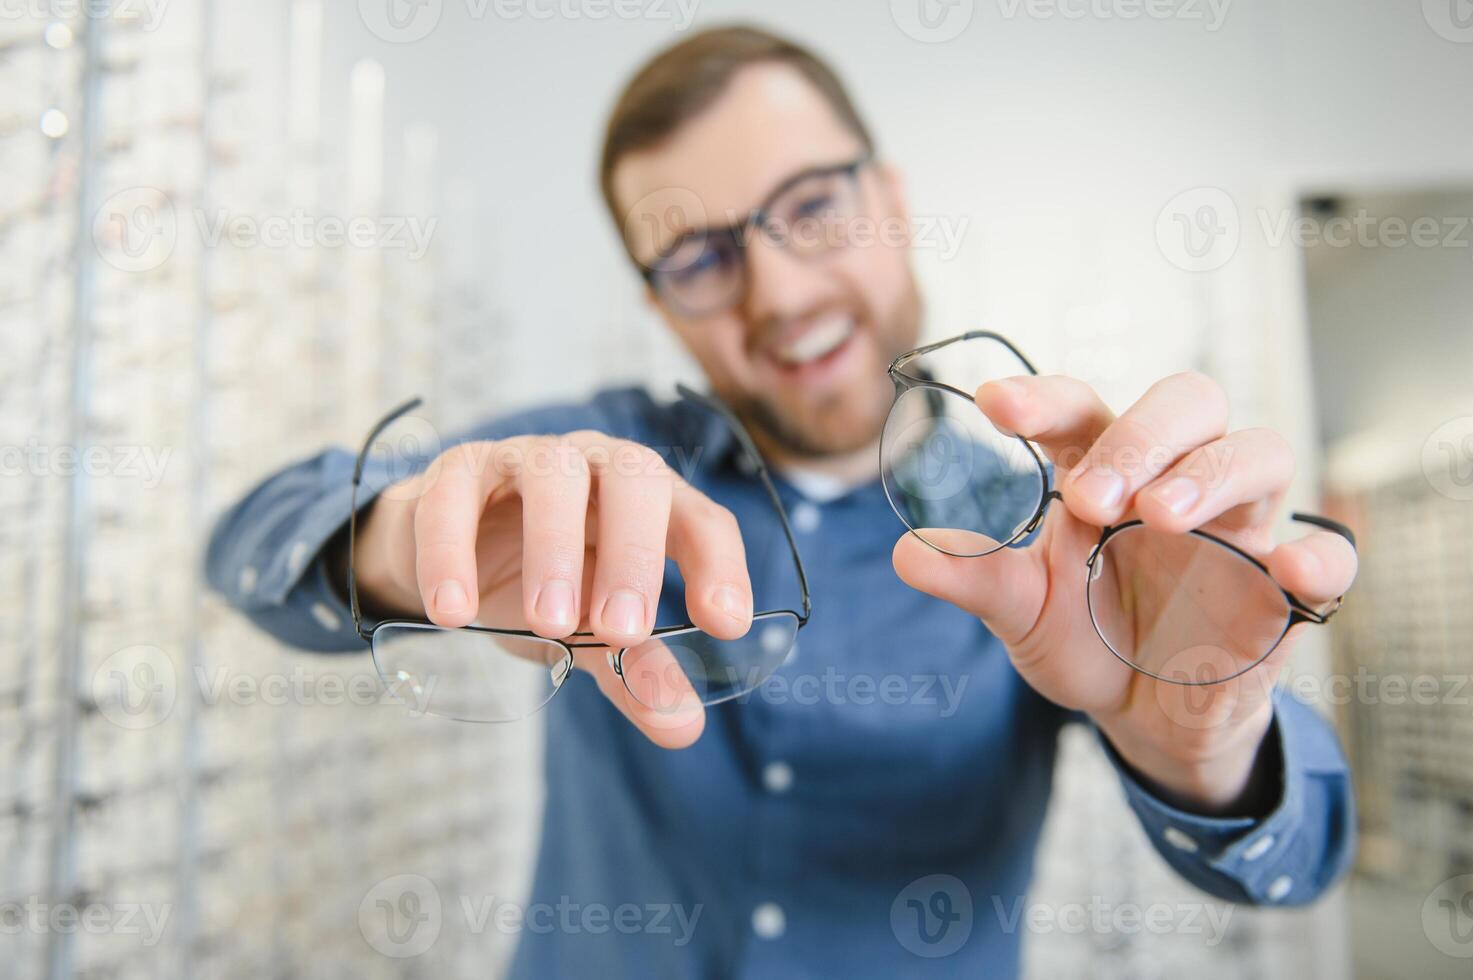 Satisfied Customer. View of happy young male client wearing new glasses, standing near rack and showcase with eyewear. Smiling man trying on spectacles photo